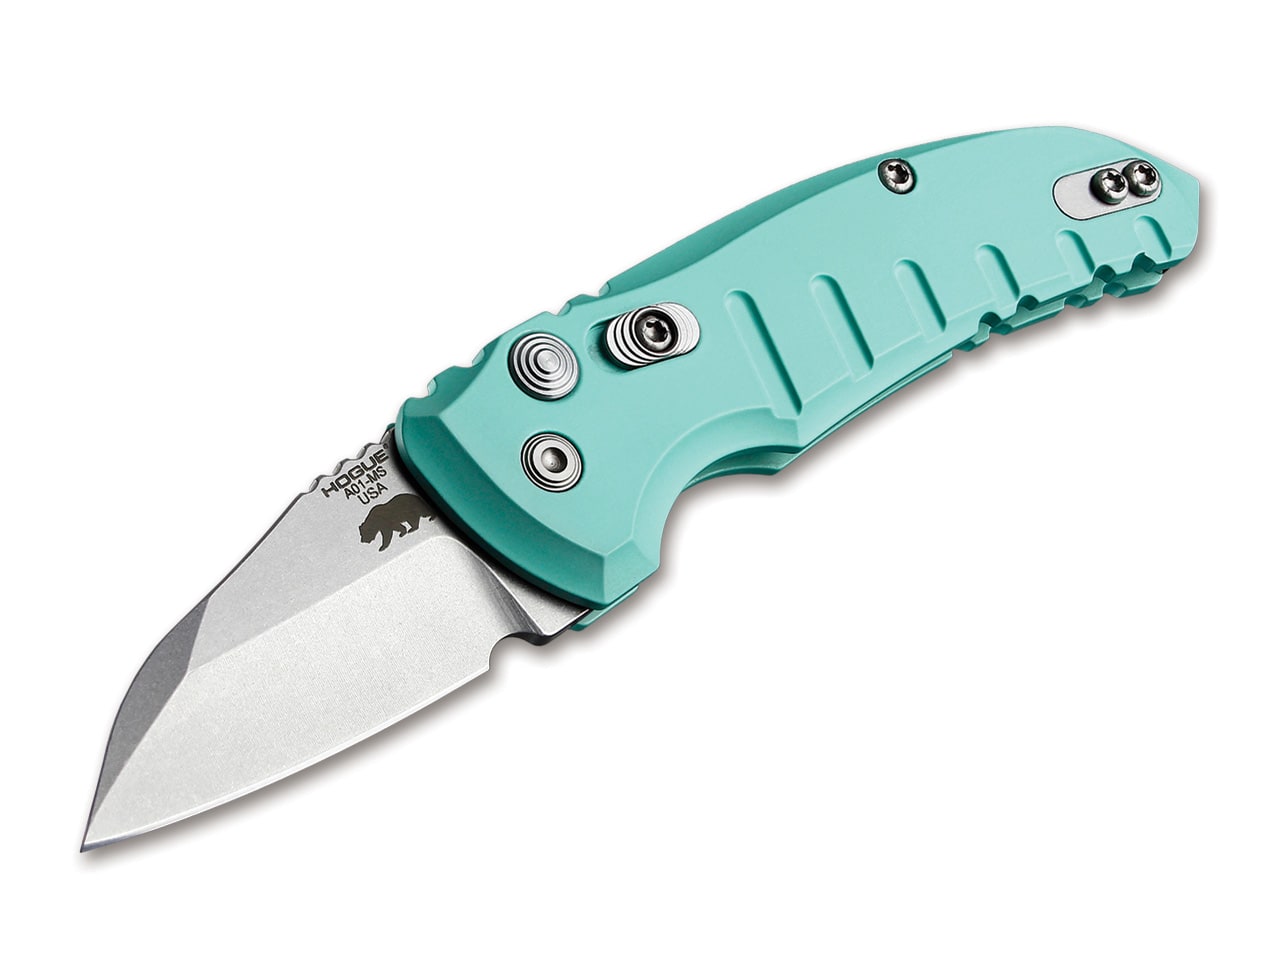 A01 Microswitch Compact Wharncliffe Aquamarine